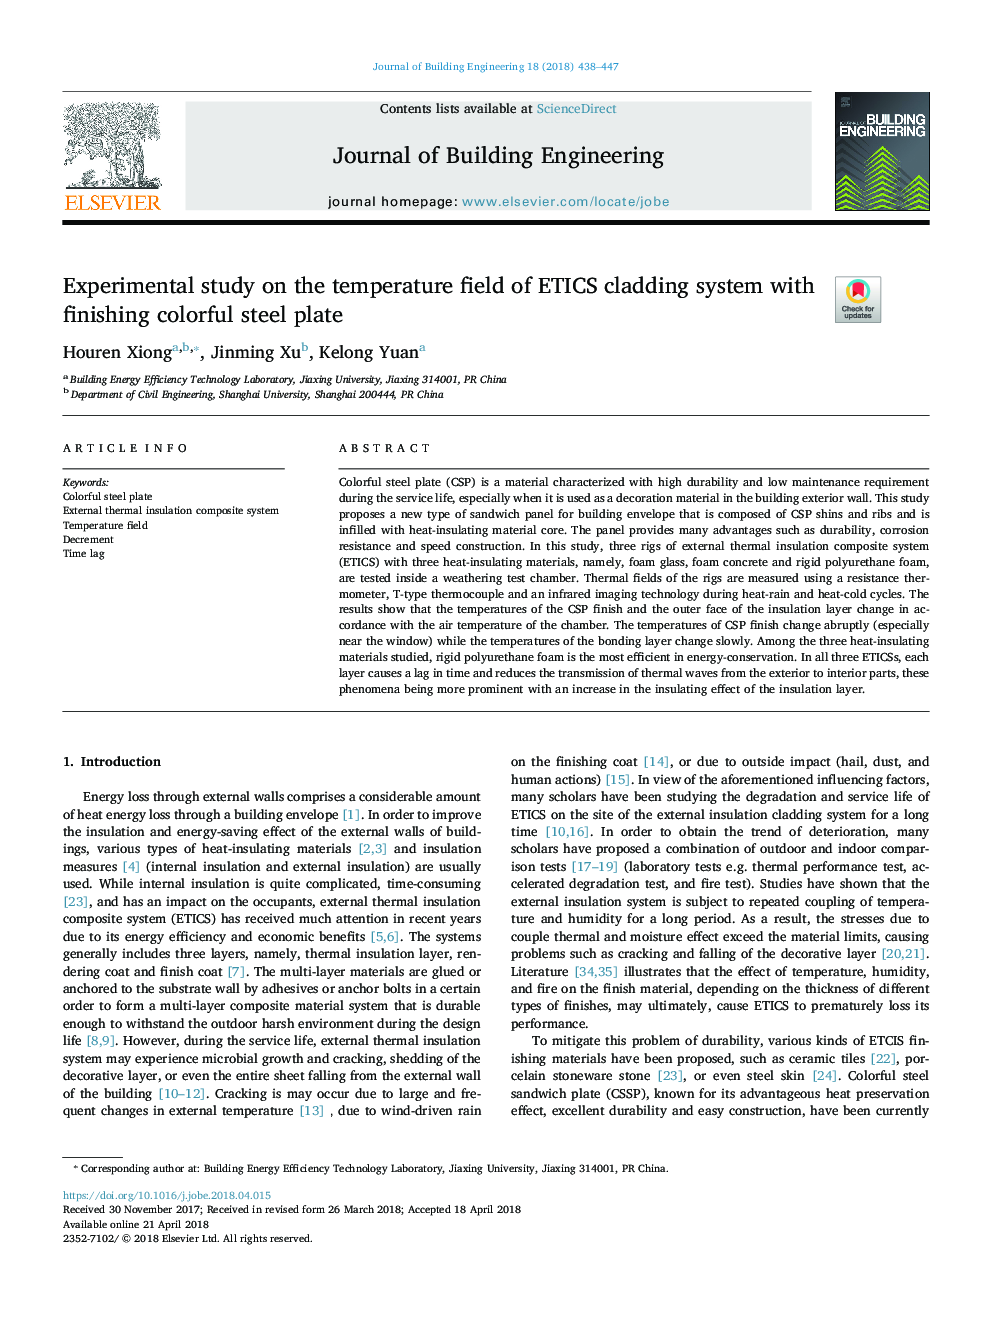 Experimental study on the temperature field of ETICS cladding system with finishing colorful steel plate